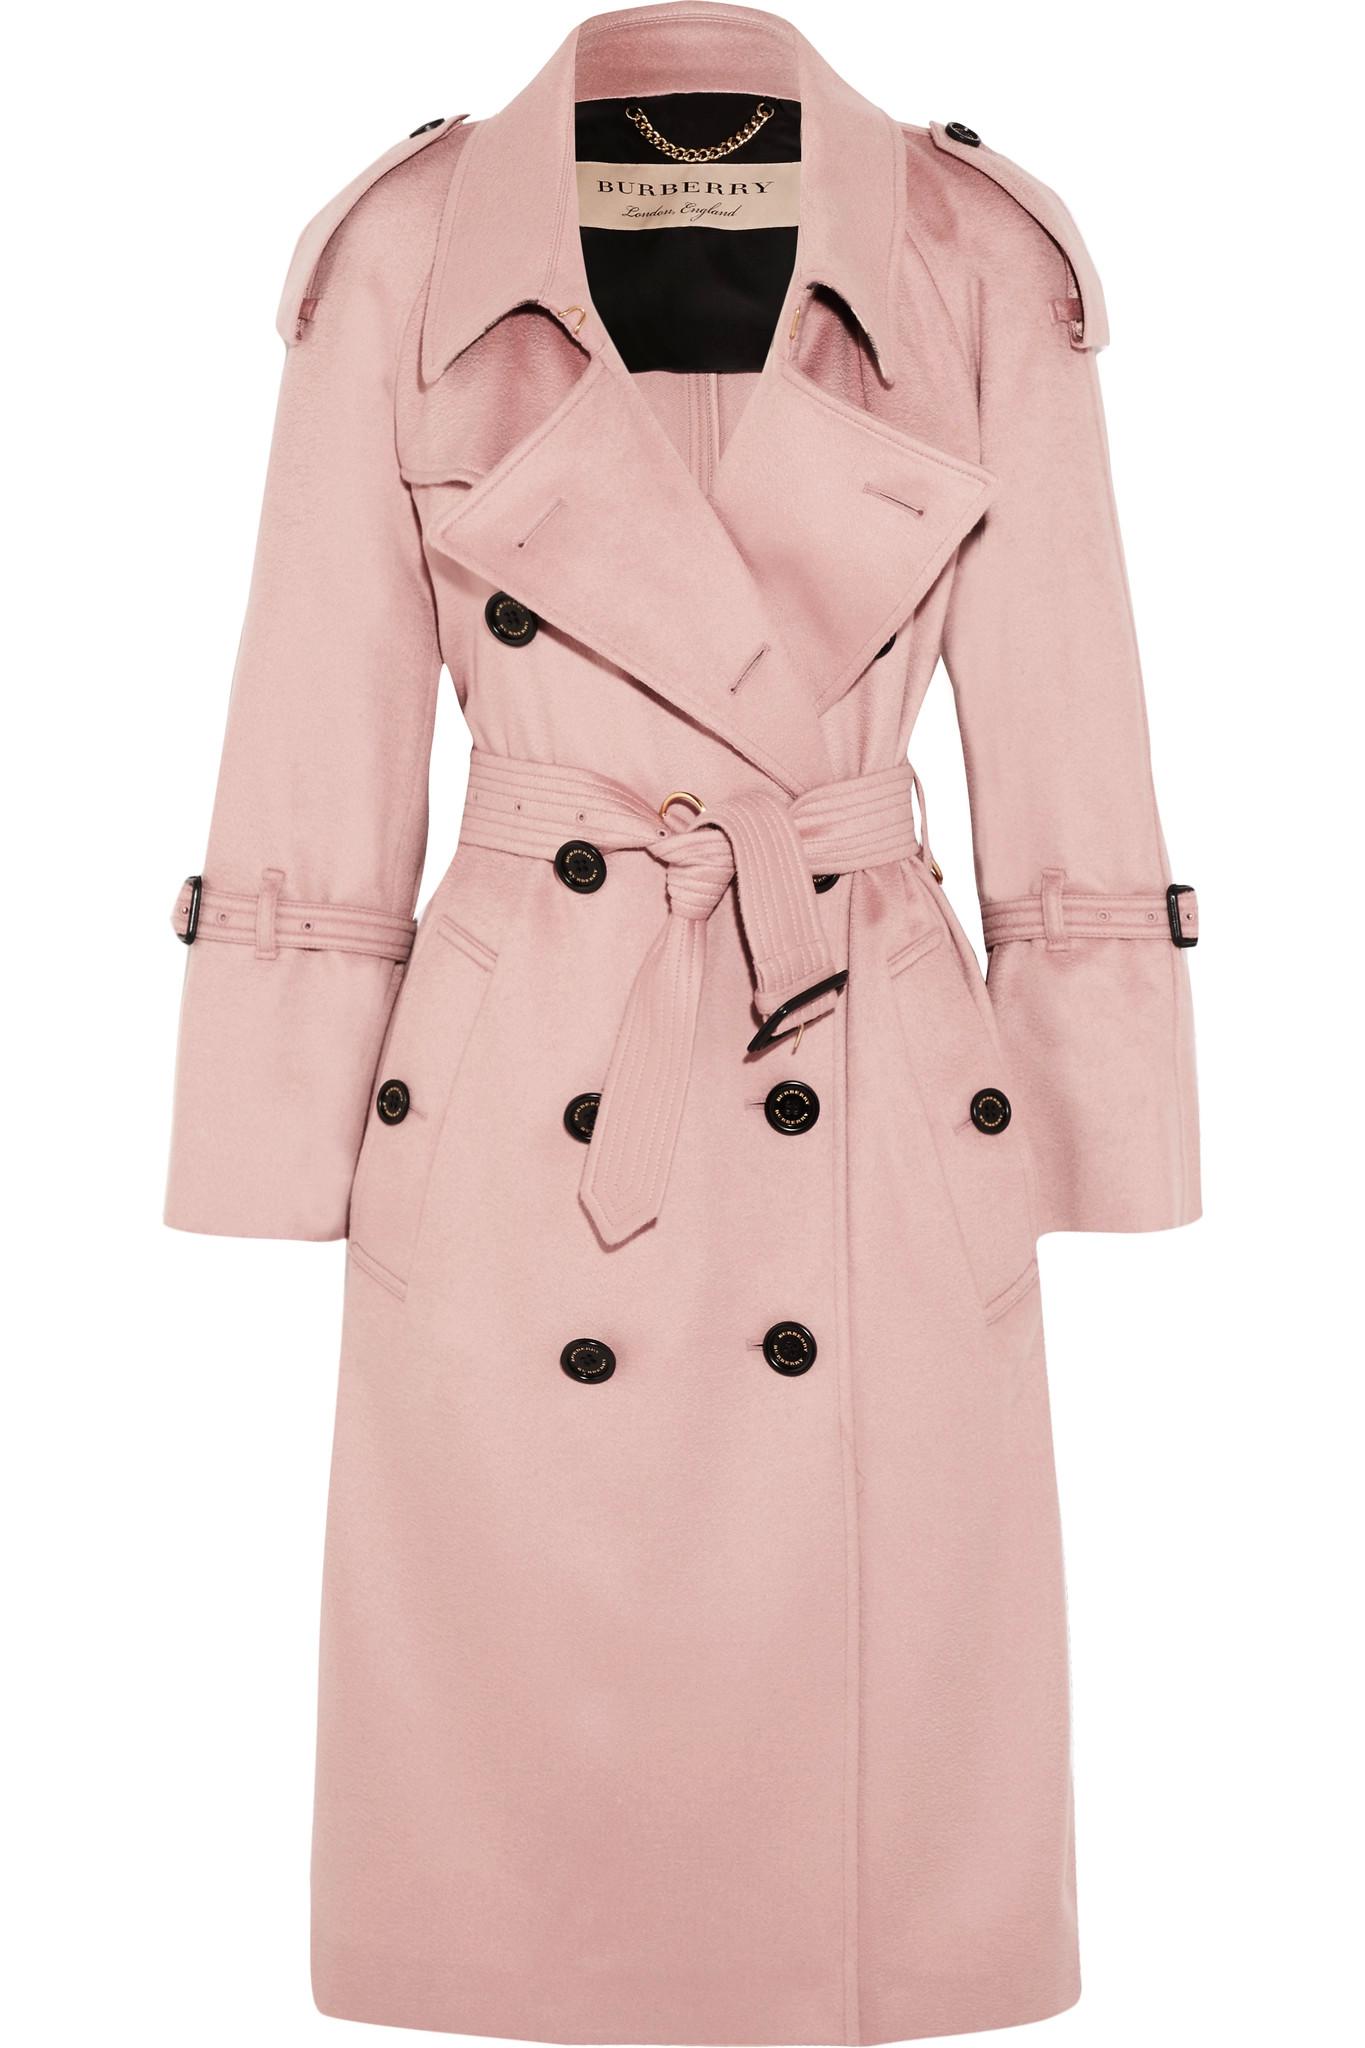 Burberry The Lakestone Cashmere Trench Coat in Pastel Pink (Pink) - Lyst